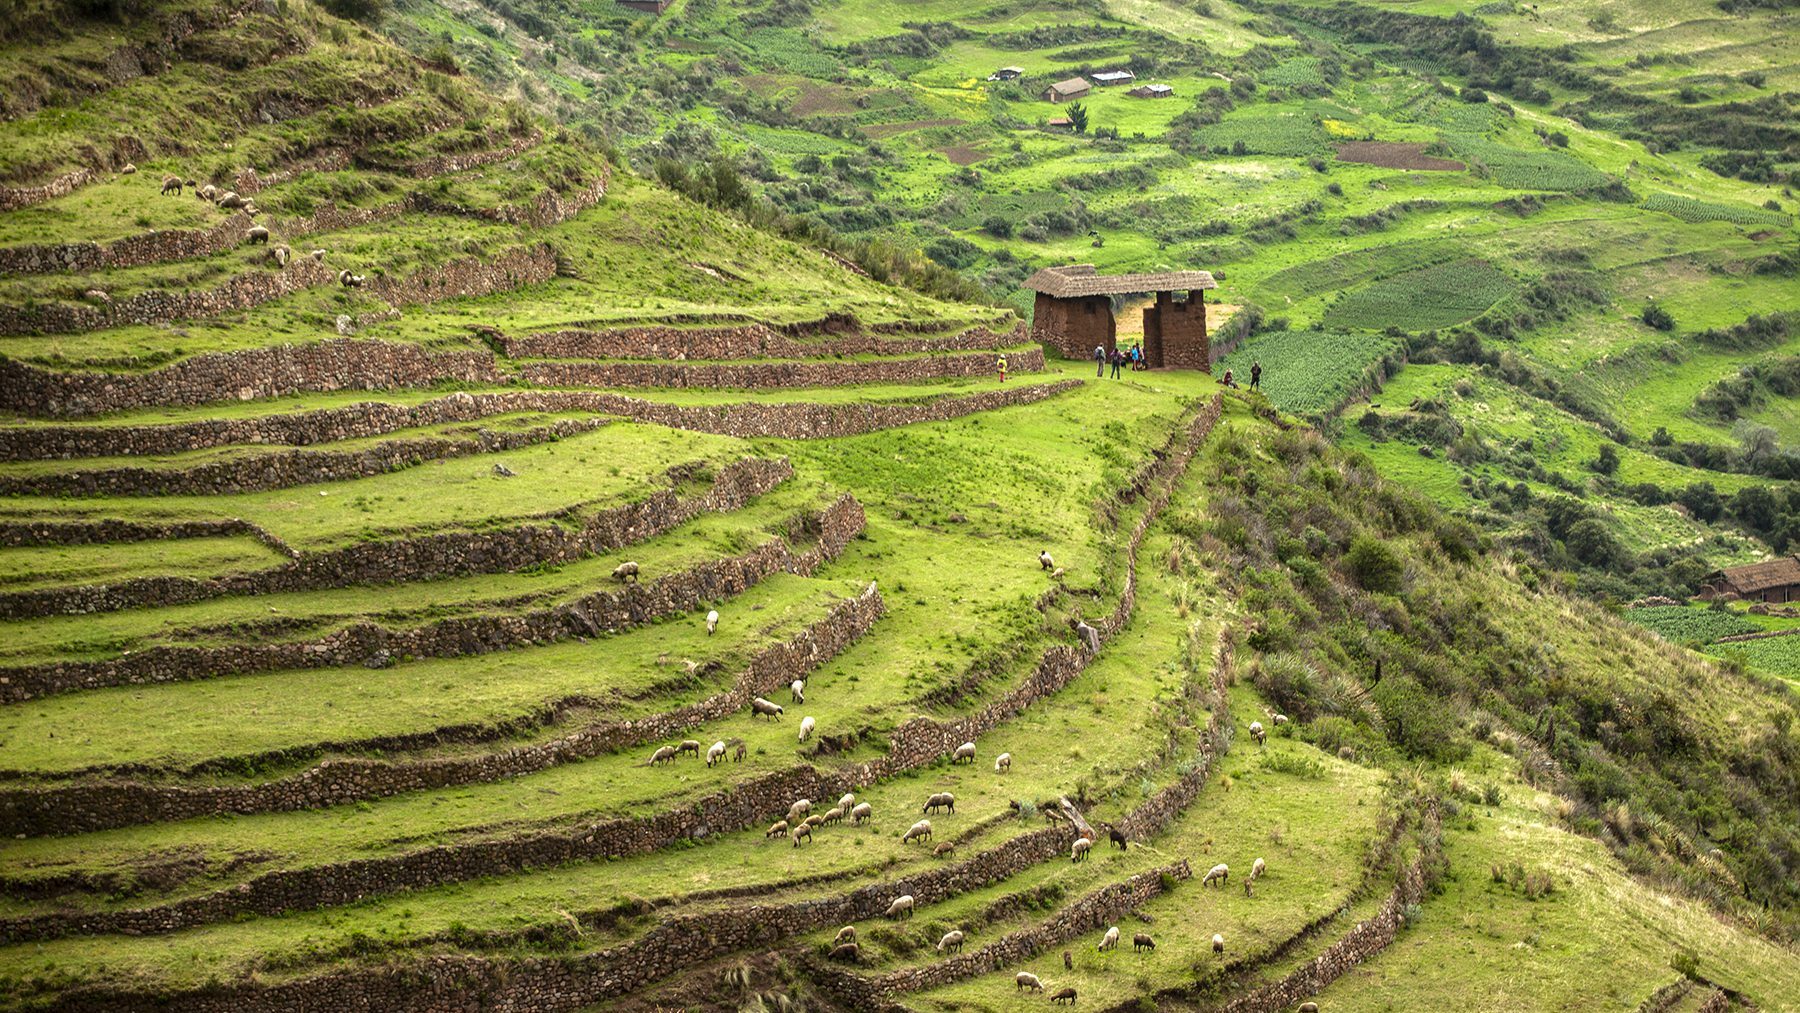 Spectacular Inca terraces and in the background you can see the entrance door to the archaeological complex of Huchuy Qosqo | Responsible Travel Peru